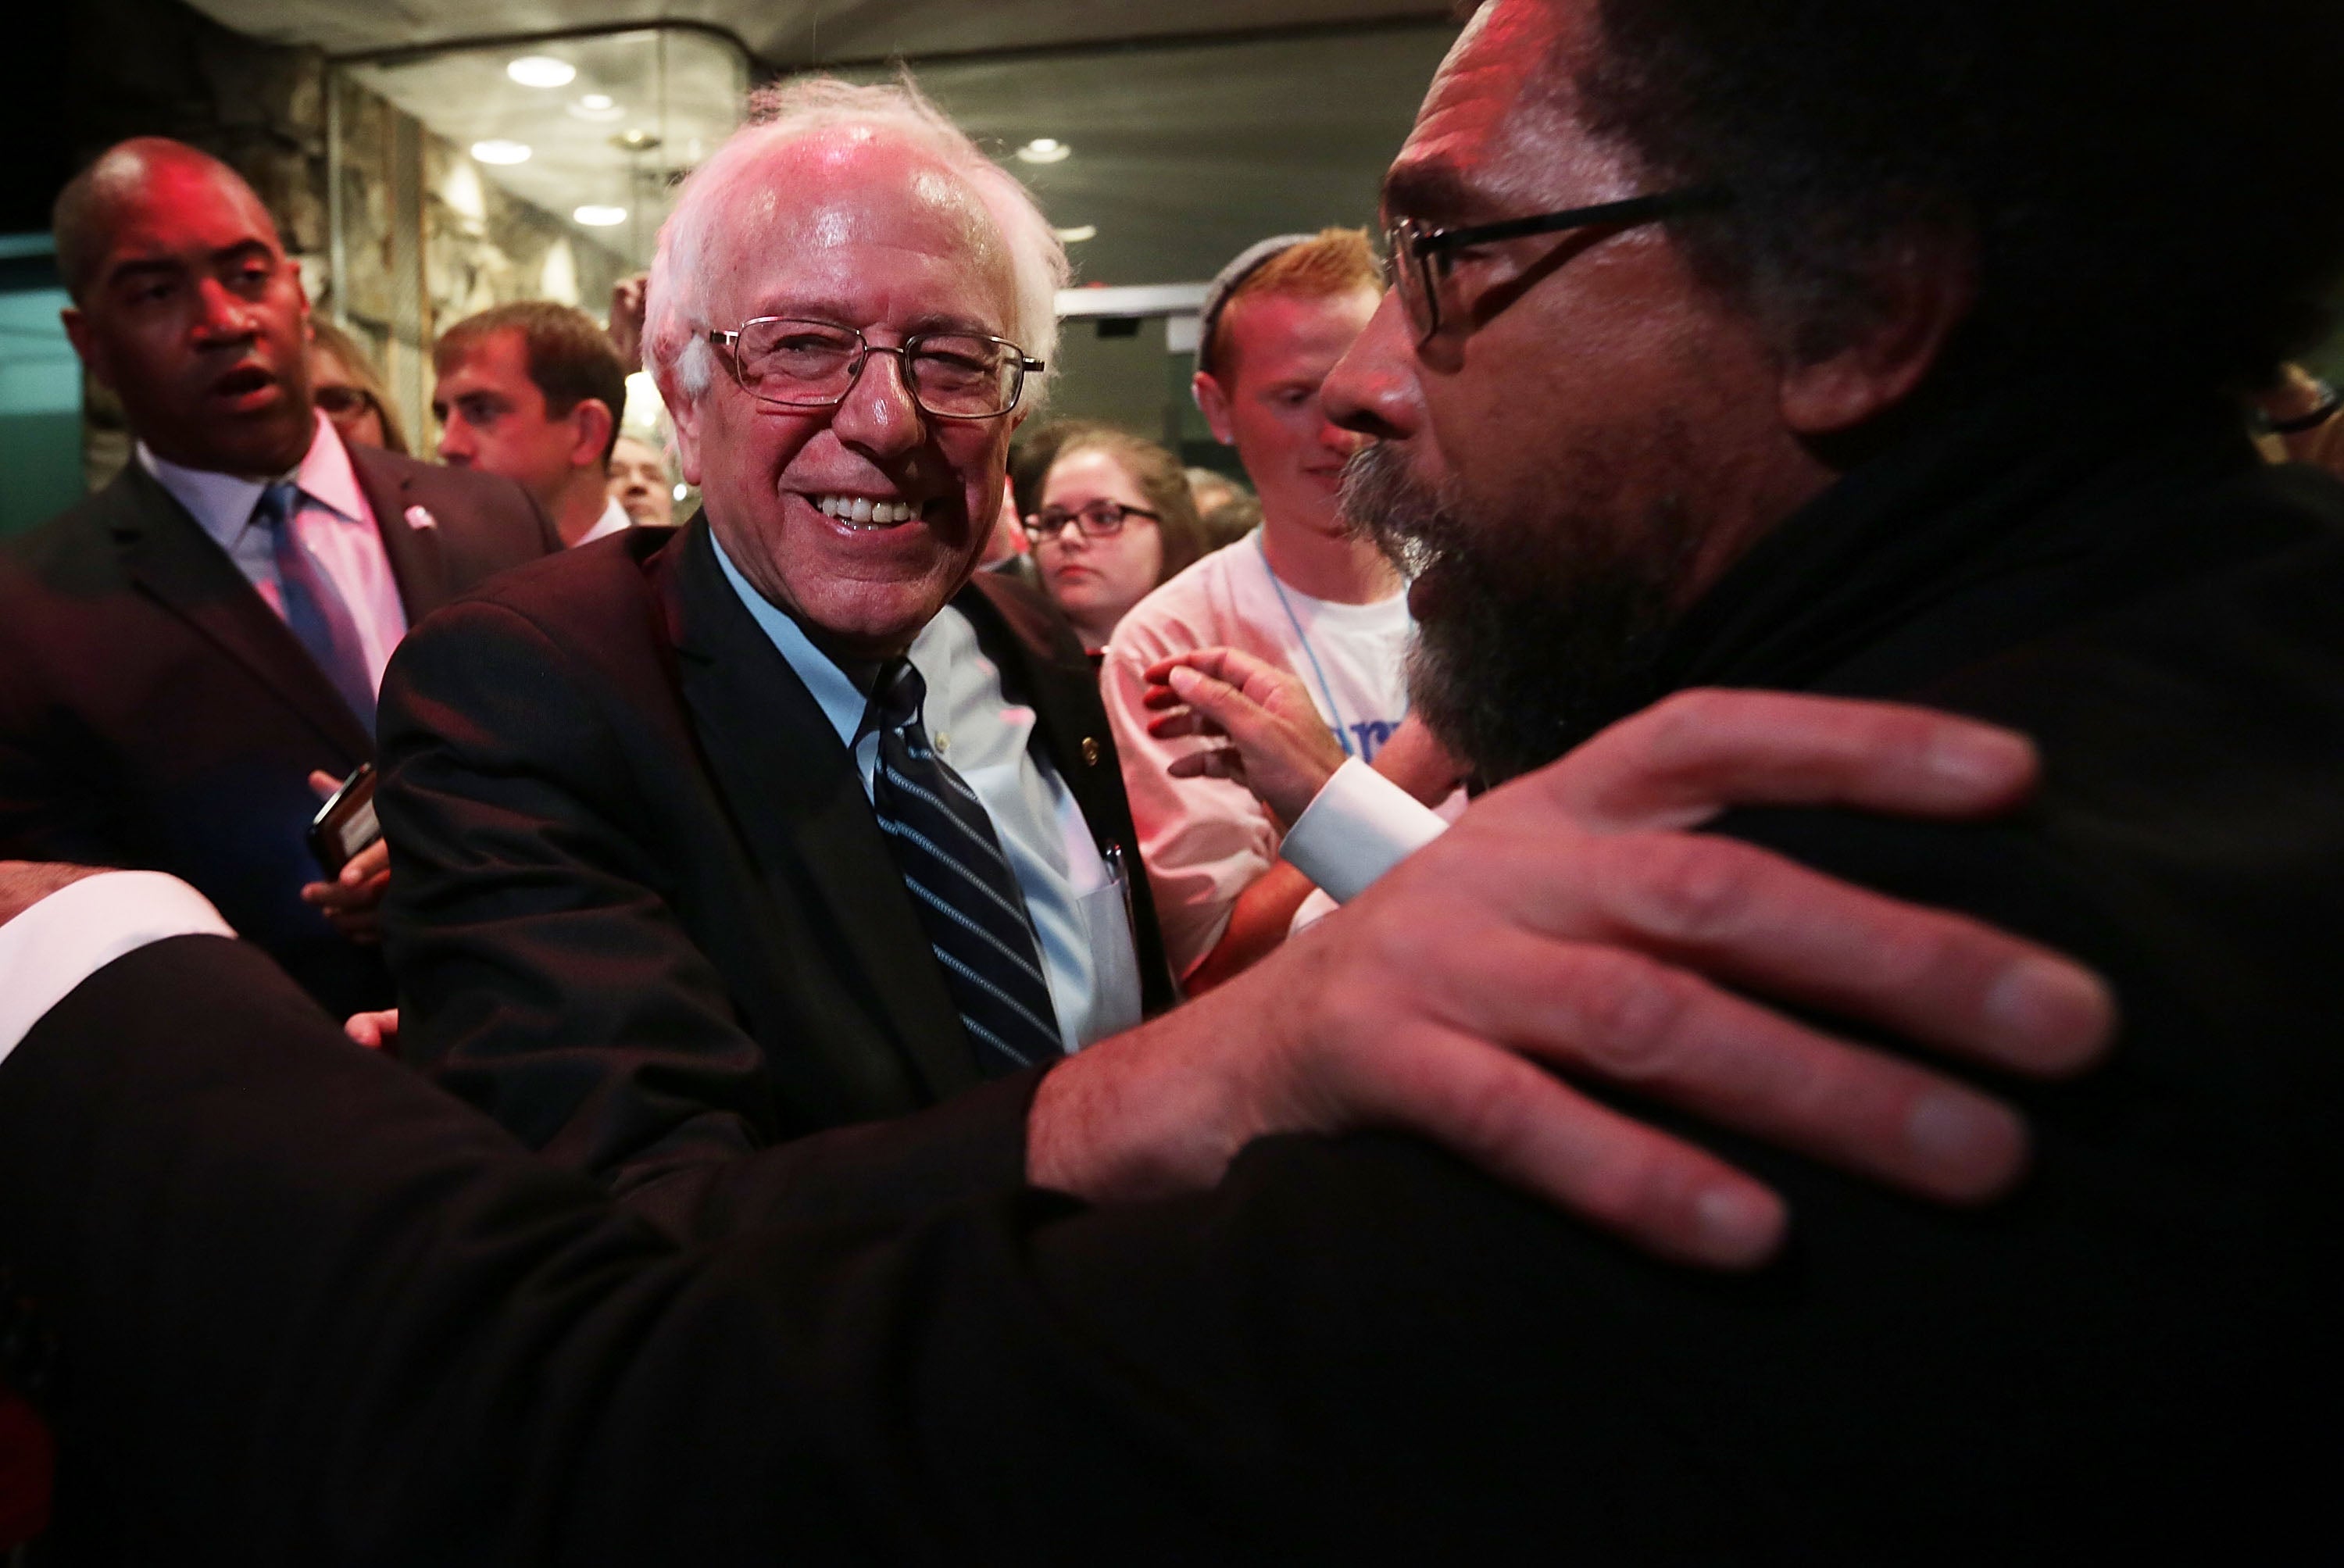 Philosopher Cornel West, right, embraces Democratic presidential candidate Sen. Bernie Sanders (I-VT) at a watch party for the second Democratic presidential debate November 14, 2015, in Des Moines, Iowa